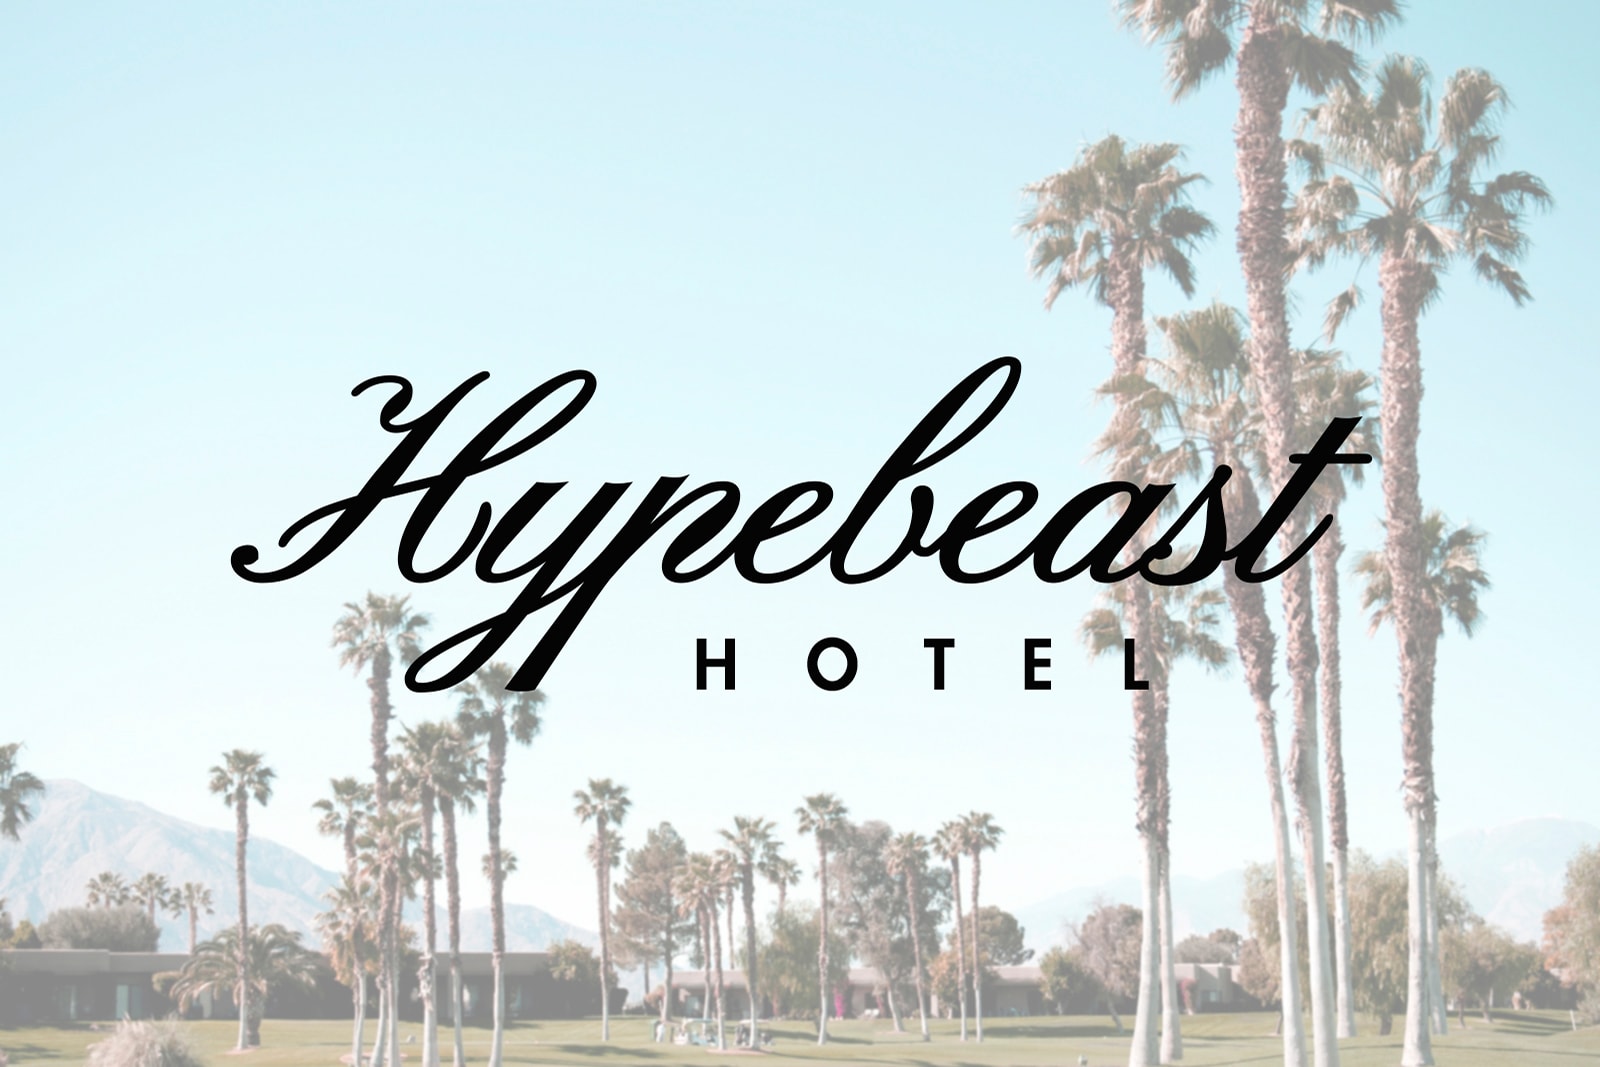 HYPEBEAST Hotel Party Palm Springs California April 15 16 2017